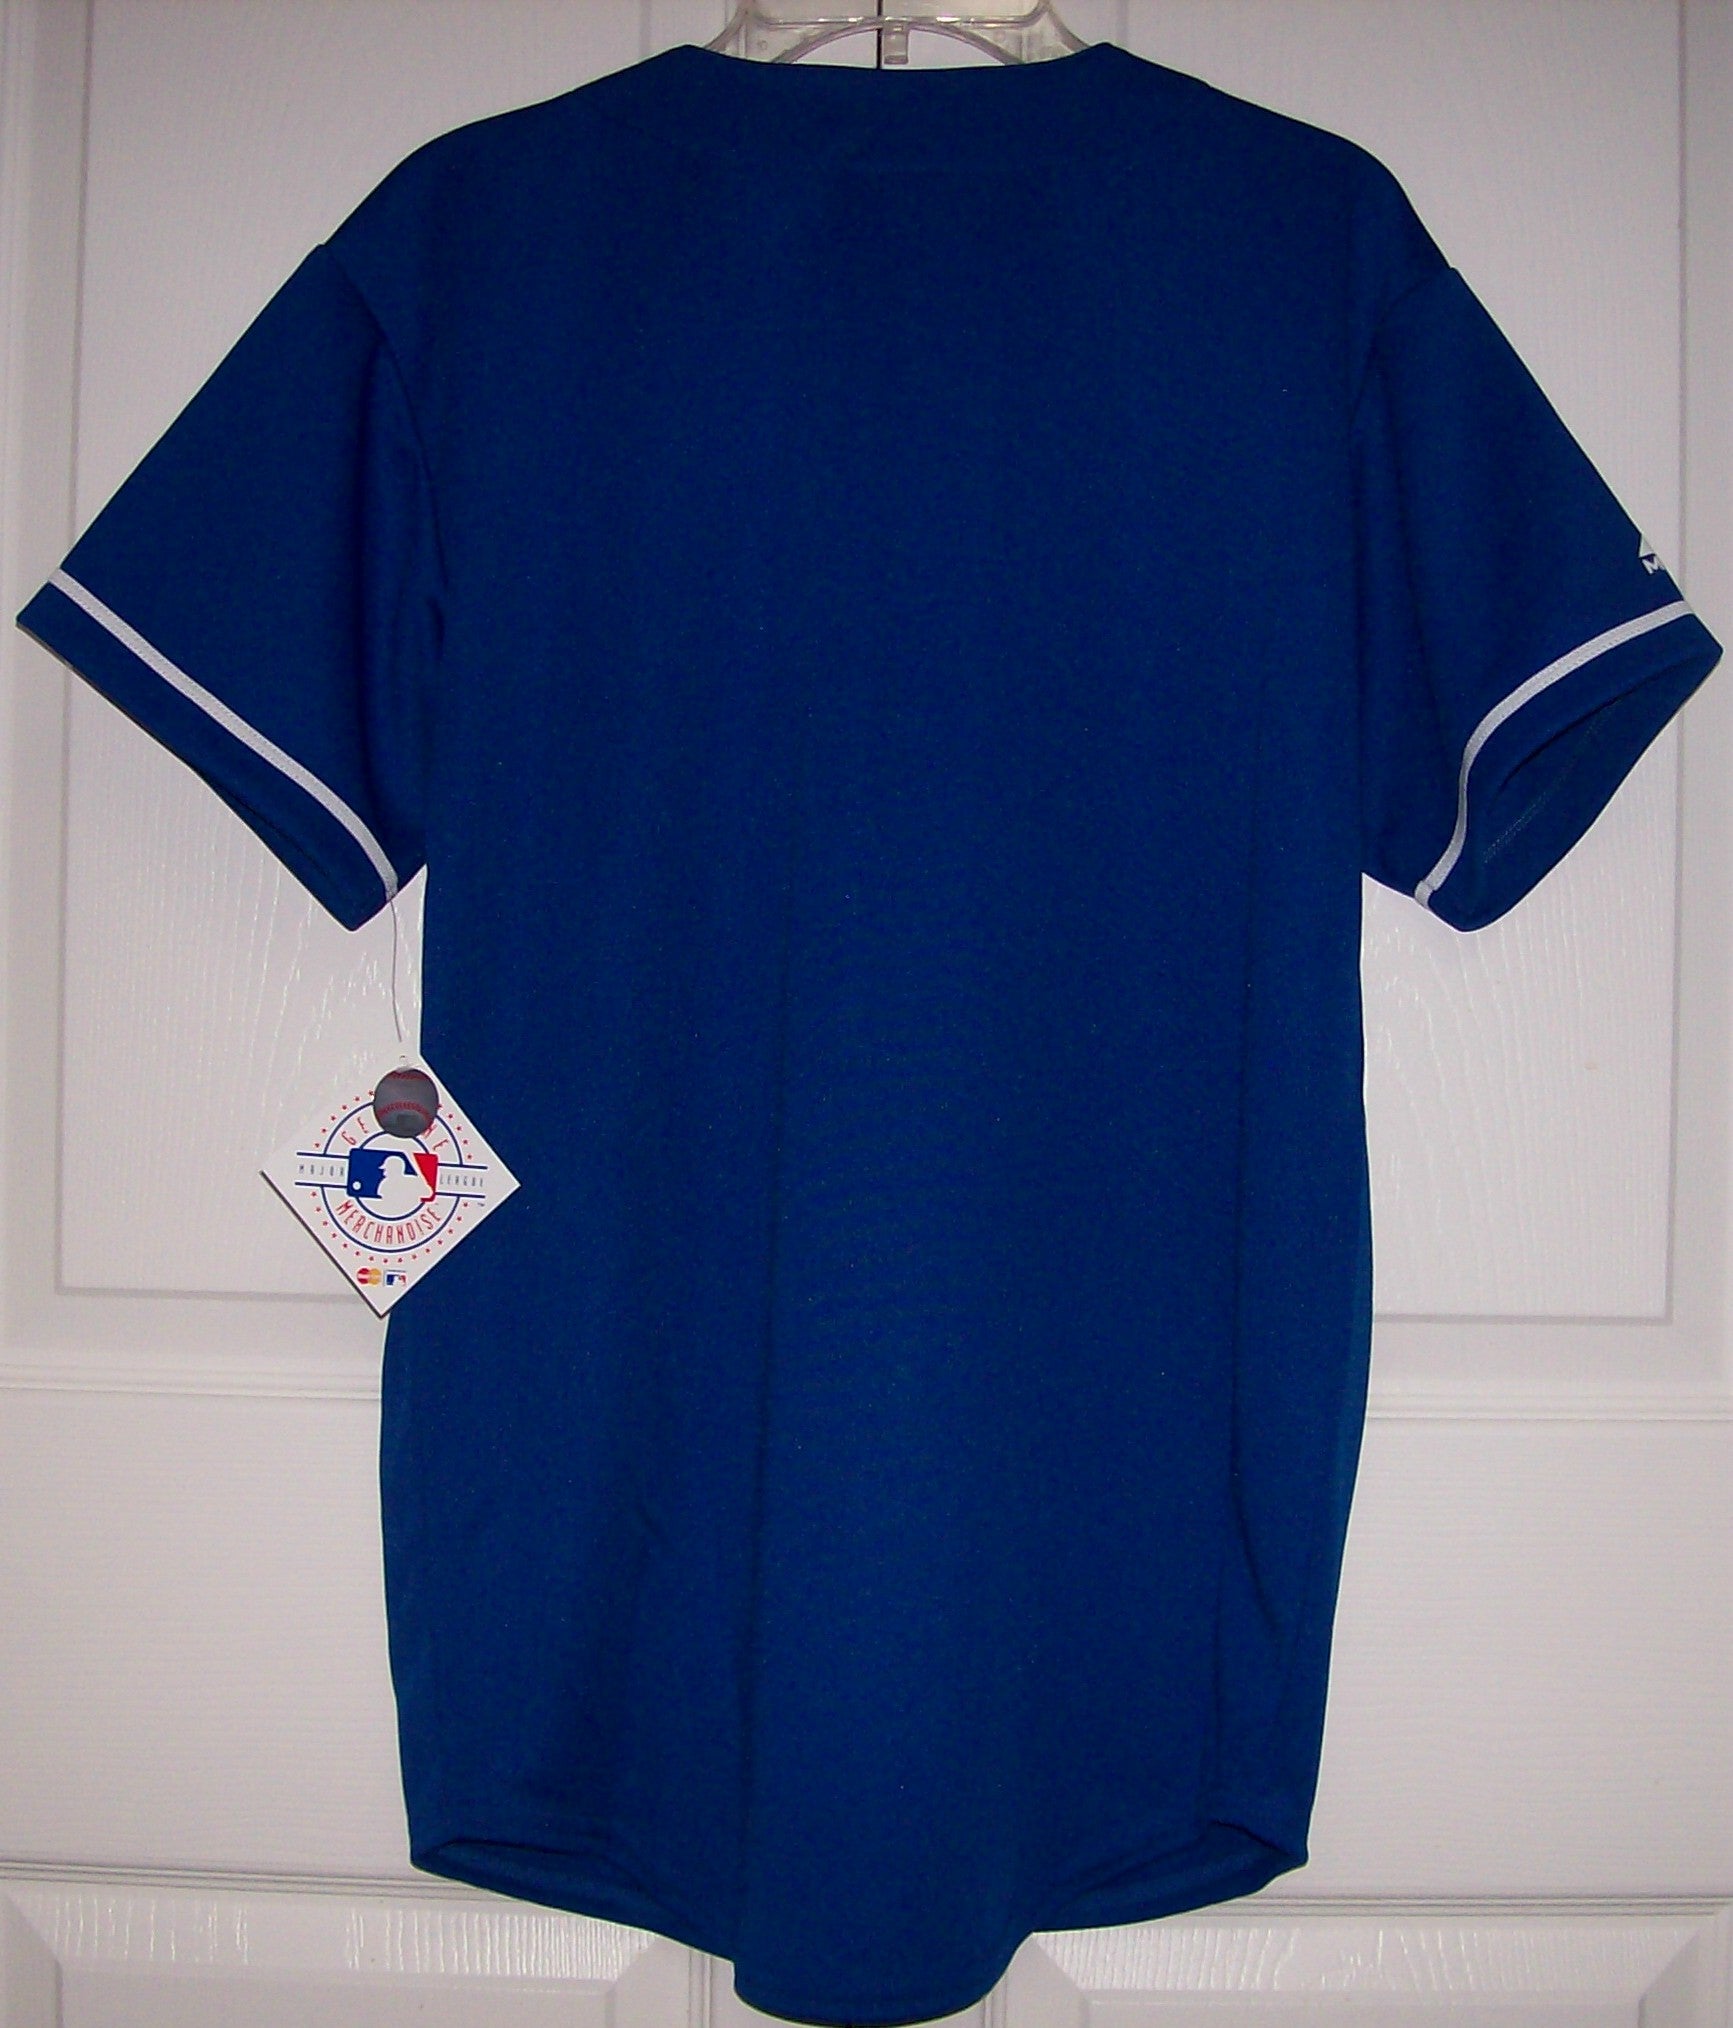 Los Angeles Dodgers Apparel, Dodgers Jersey, Dodgers Clothing and Gear